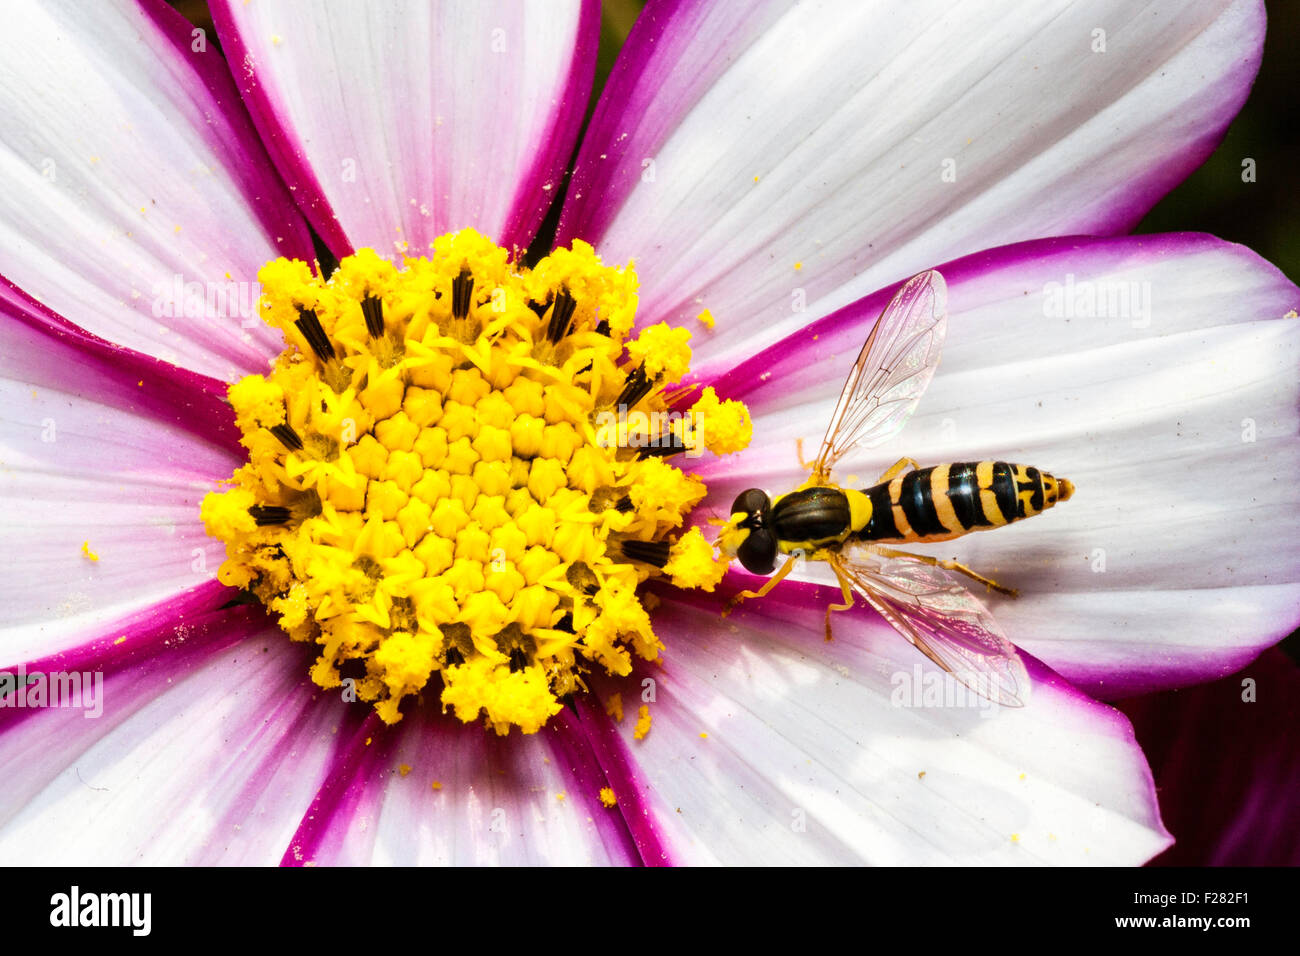 Insect. Hover fly, also called sweat bee, syrphid fly and flower fly, 'myathropa Florae', collecting nectar from a cosmos flower. Macro shot. Stock Photo